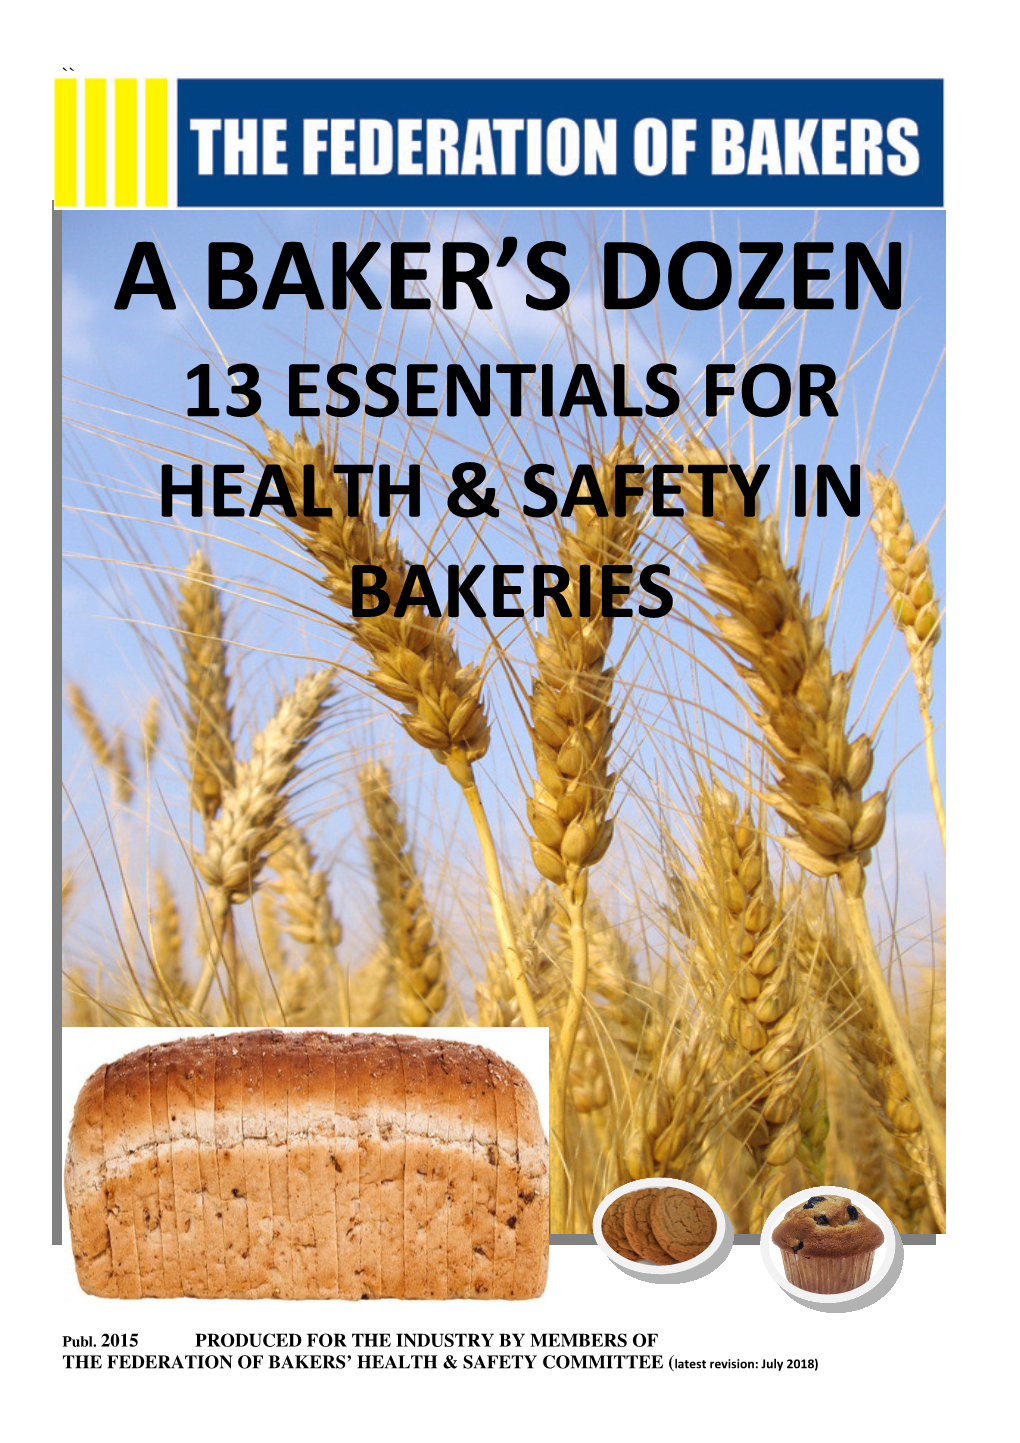 Bakers Dozen 13 Essentials for Health and Safety in Bakeries